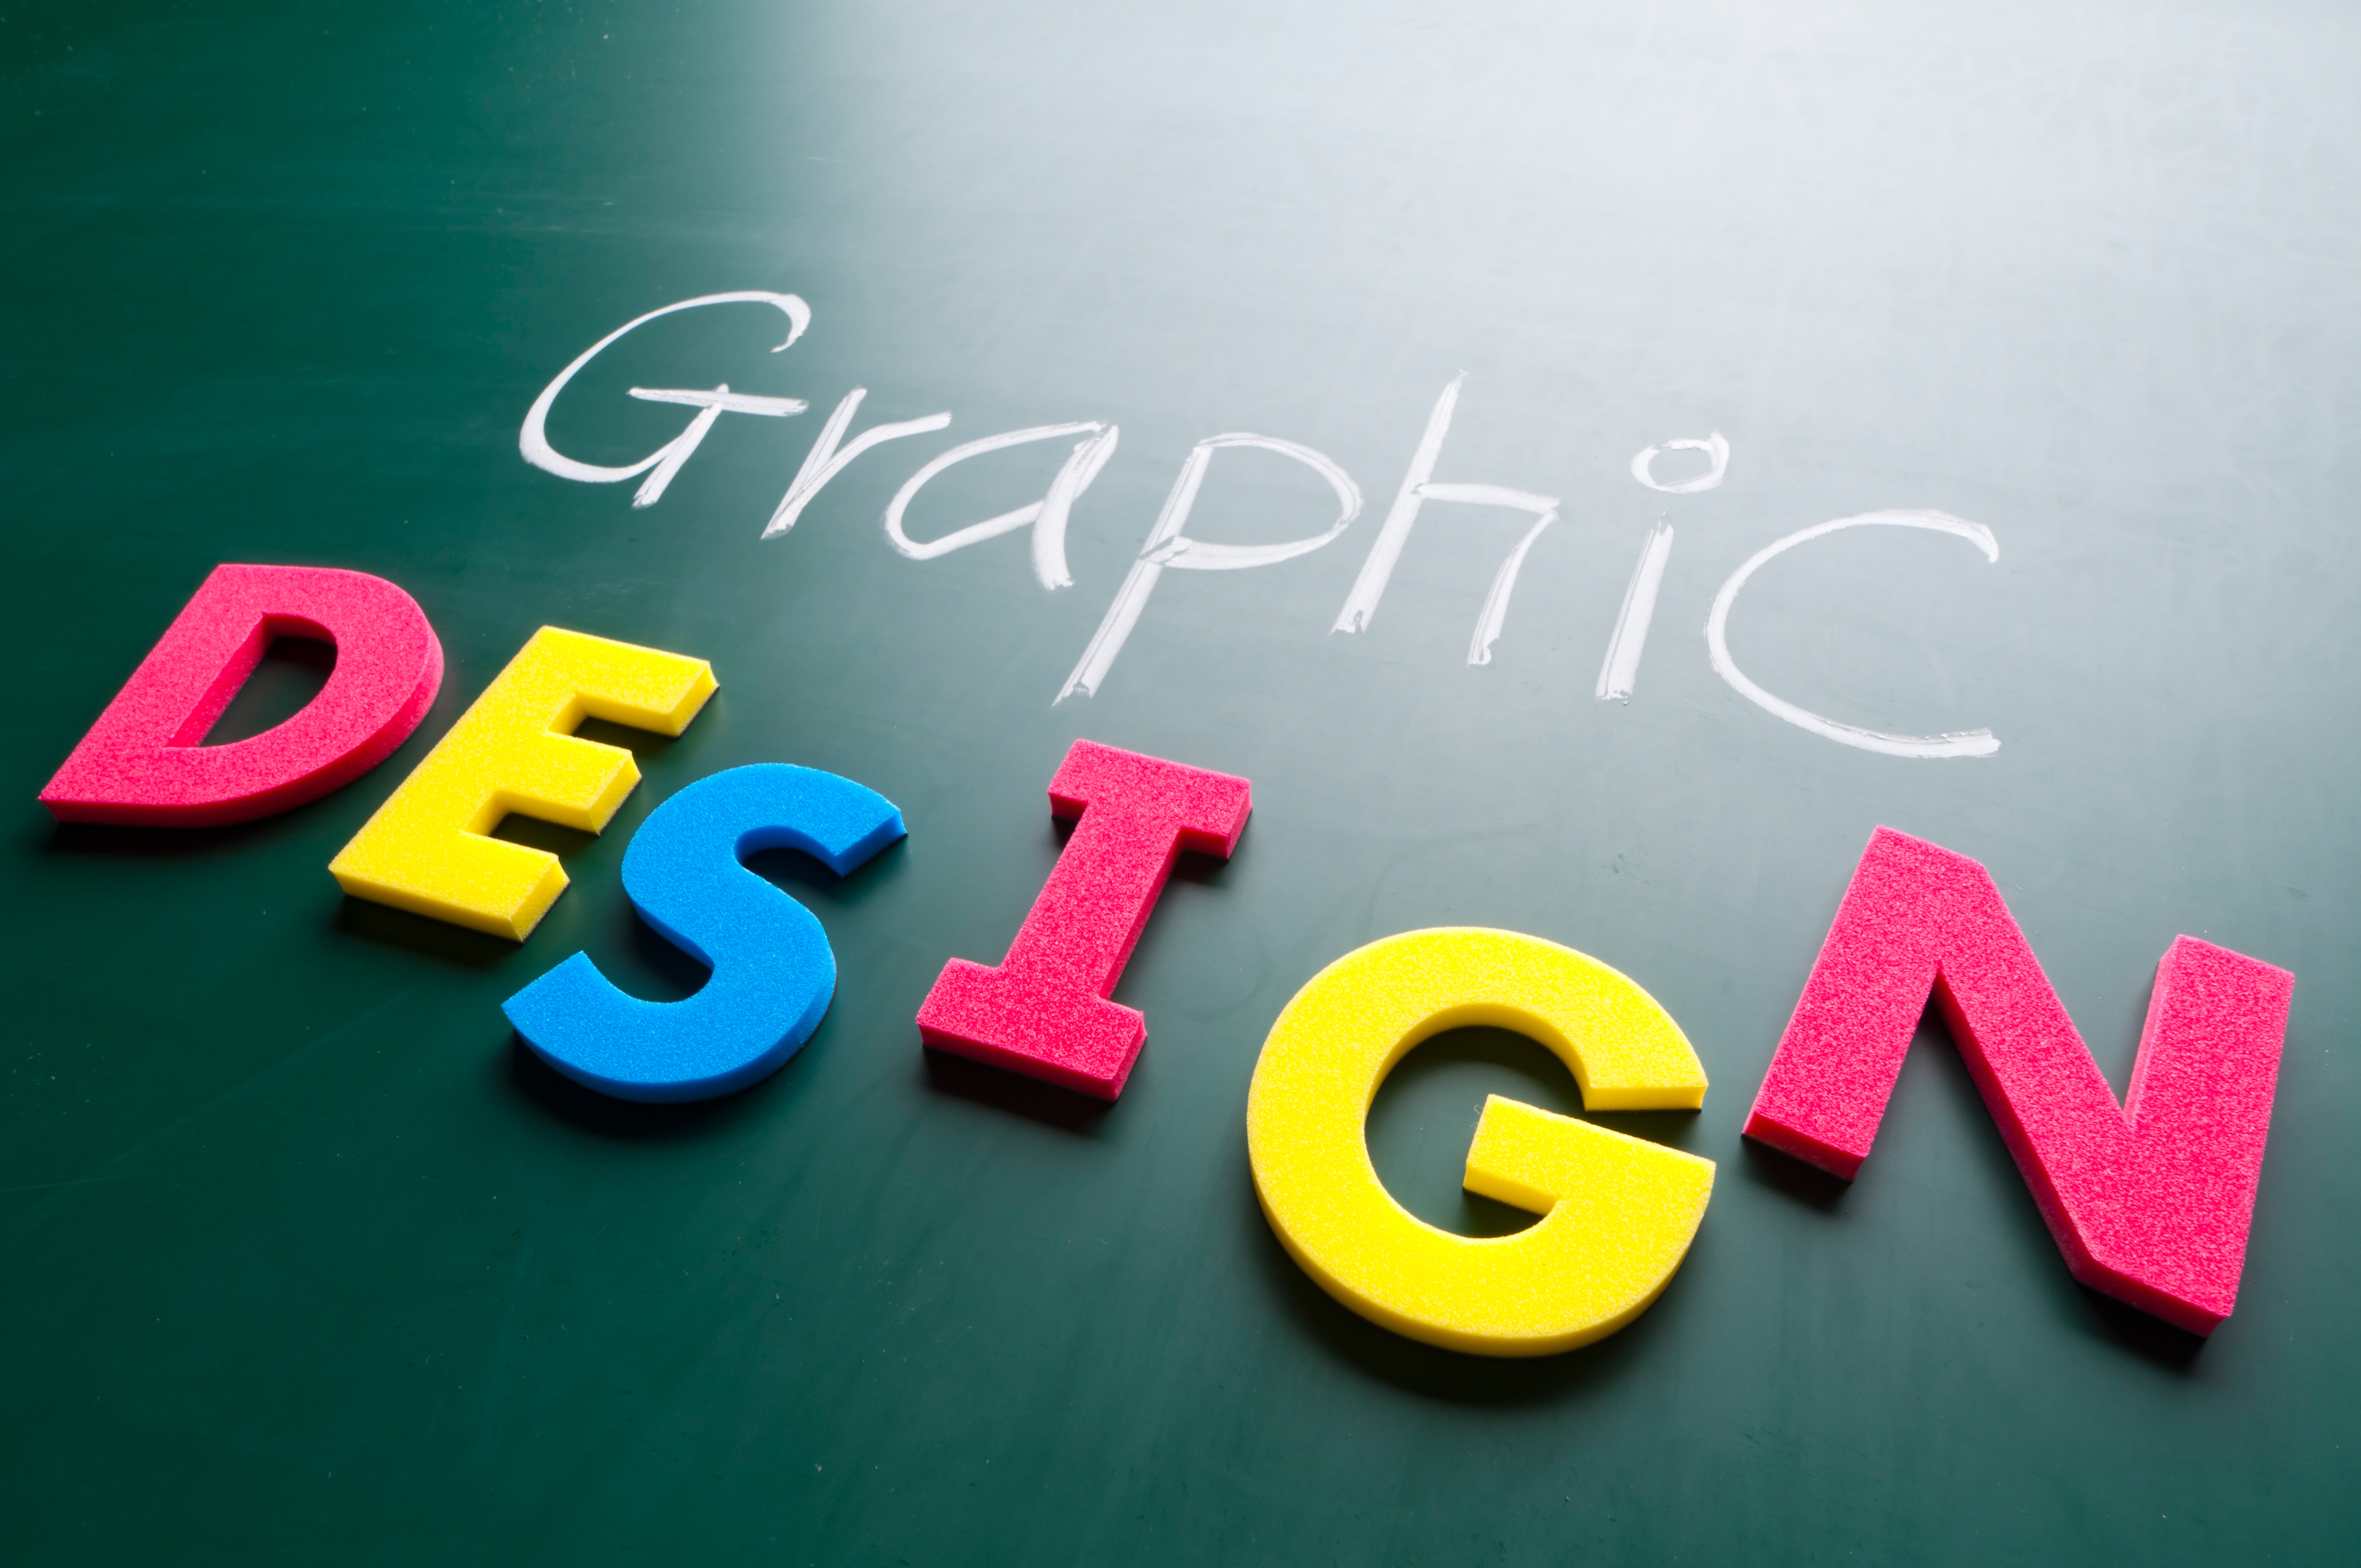 Graphics Designing Course Where to Learn best and Why?